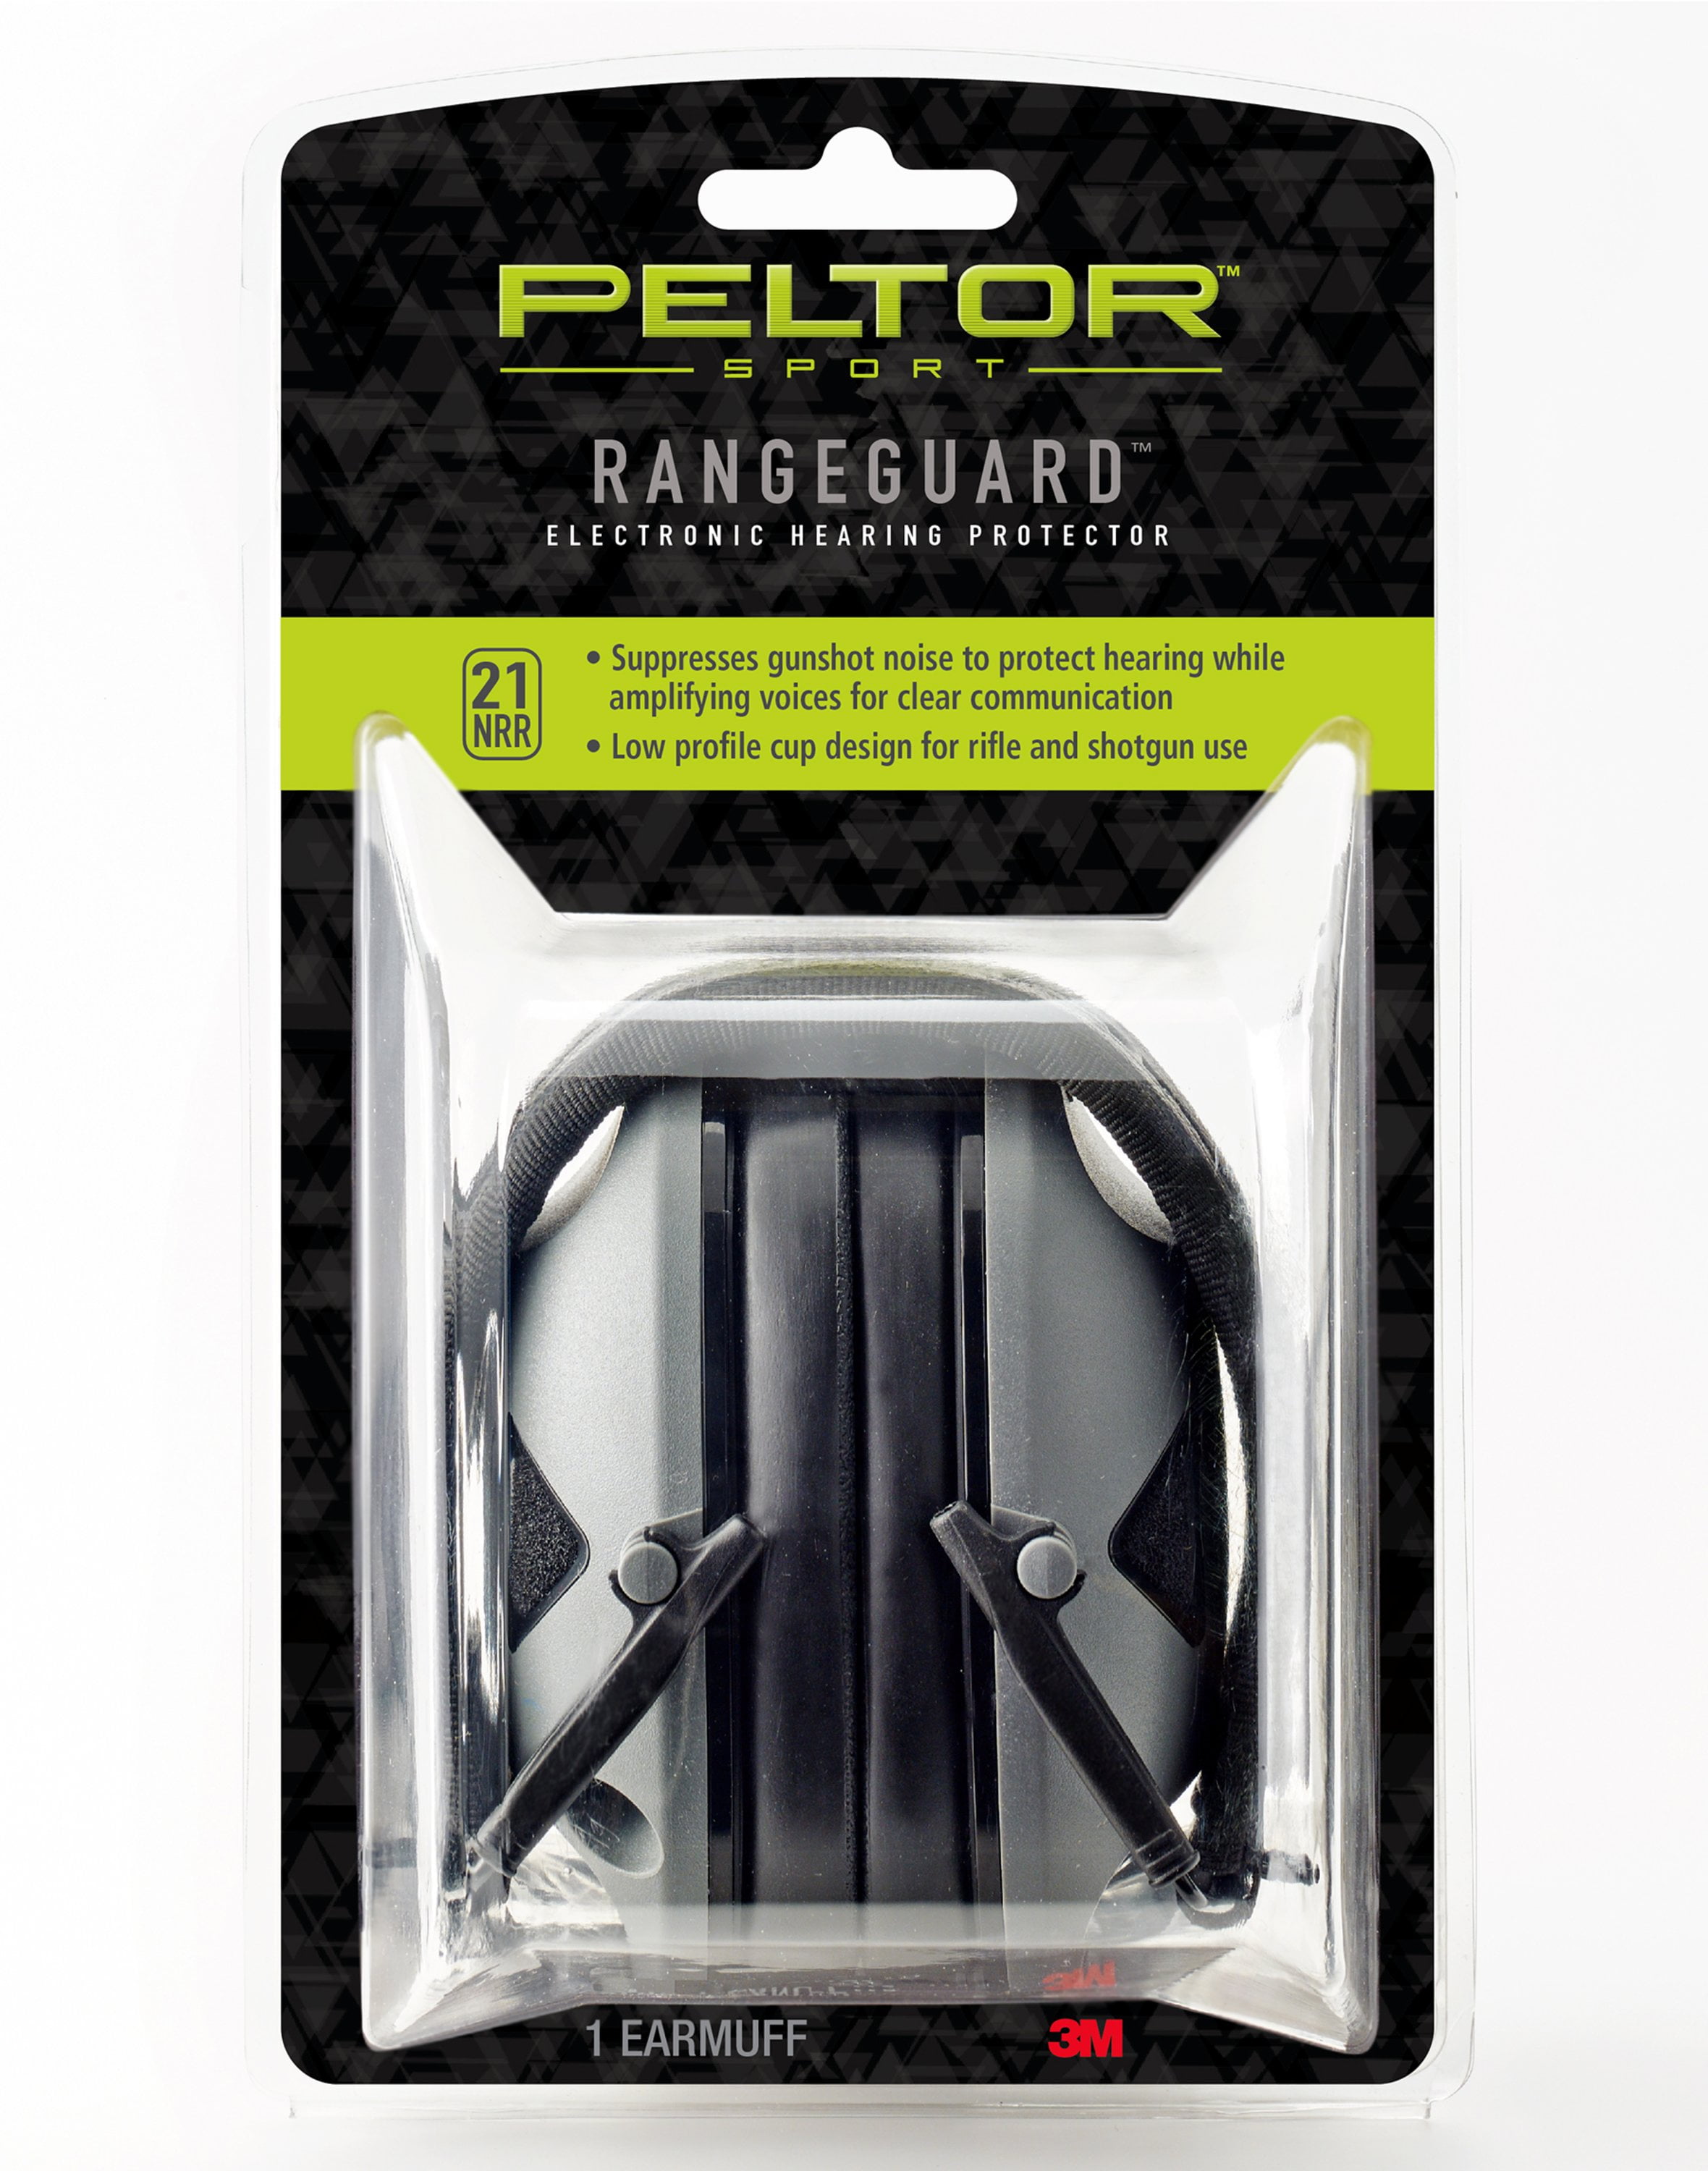 Peltor Sport Tactical 100 Electronic Hearing Protector NRR 22 d Ear Protection 